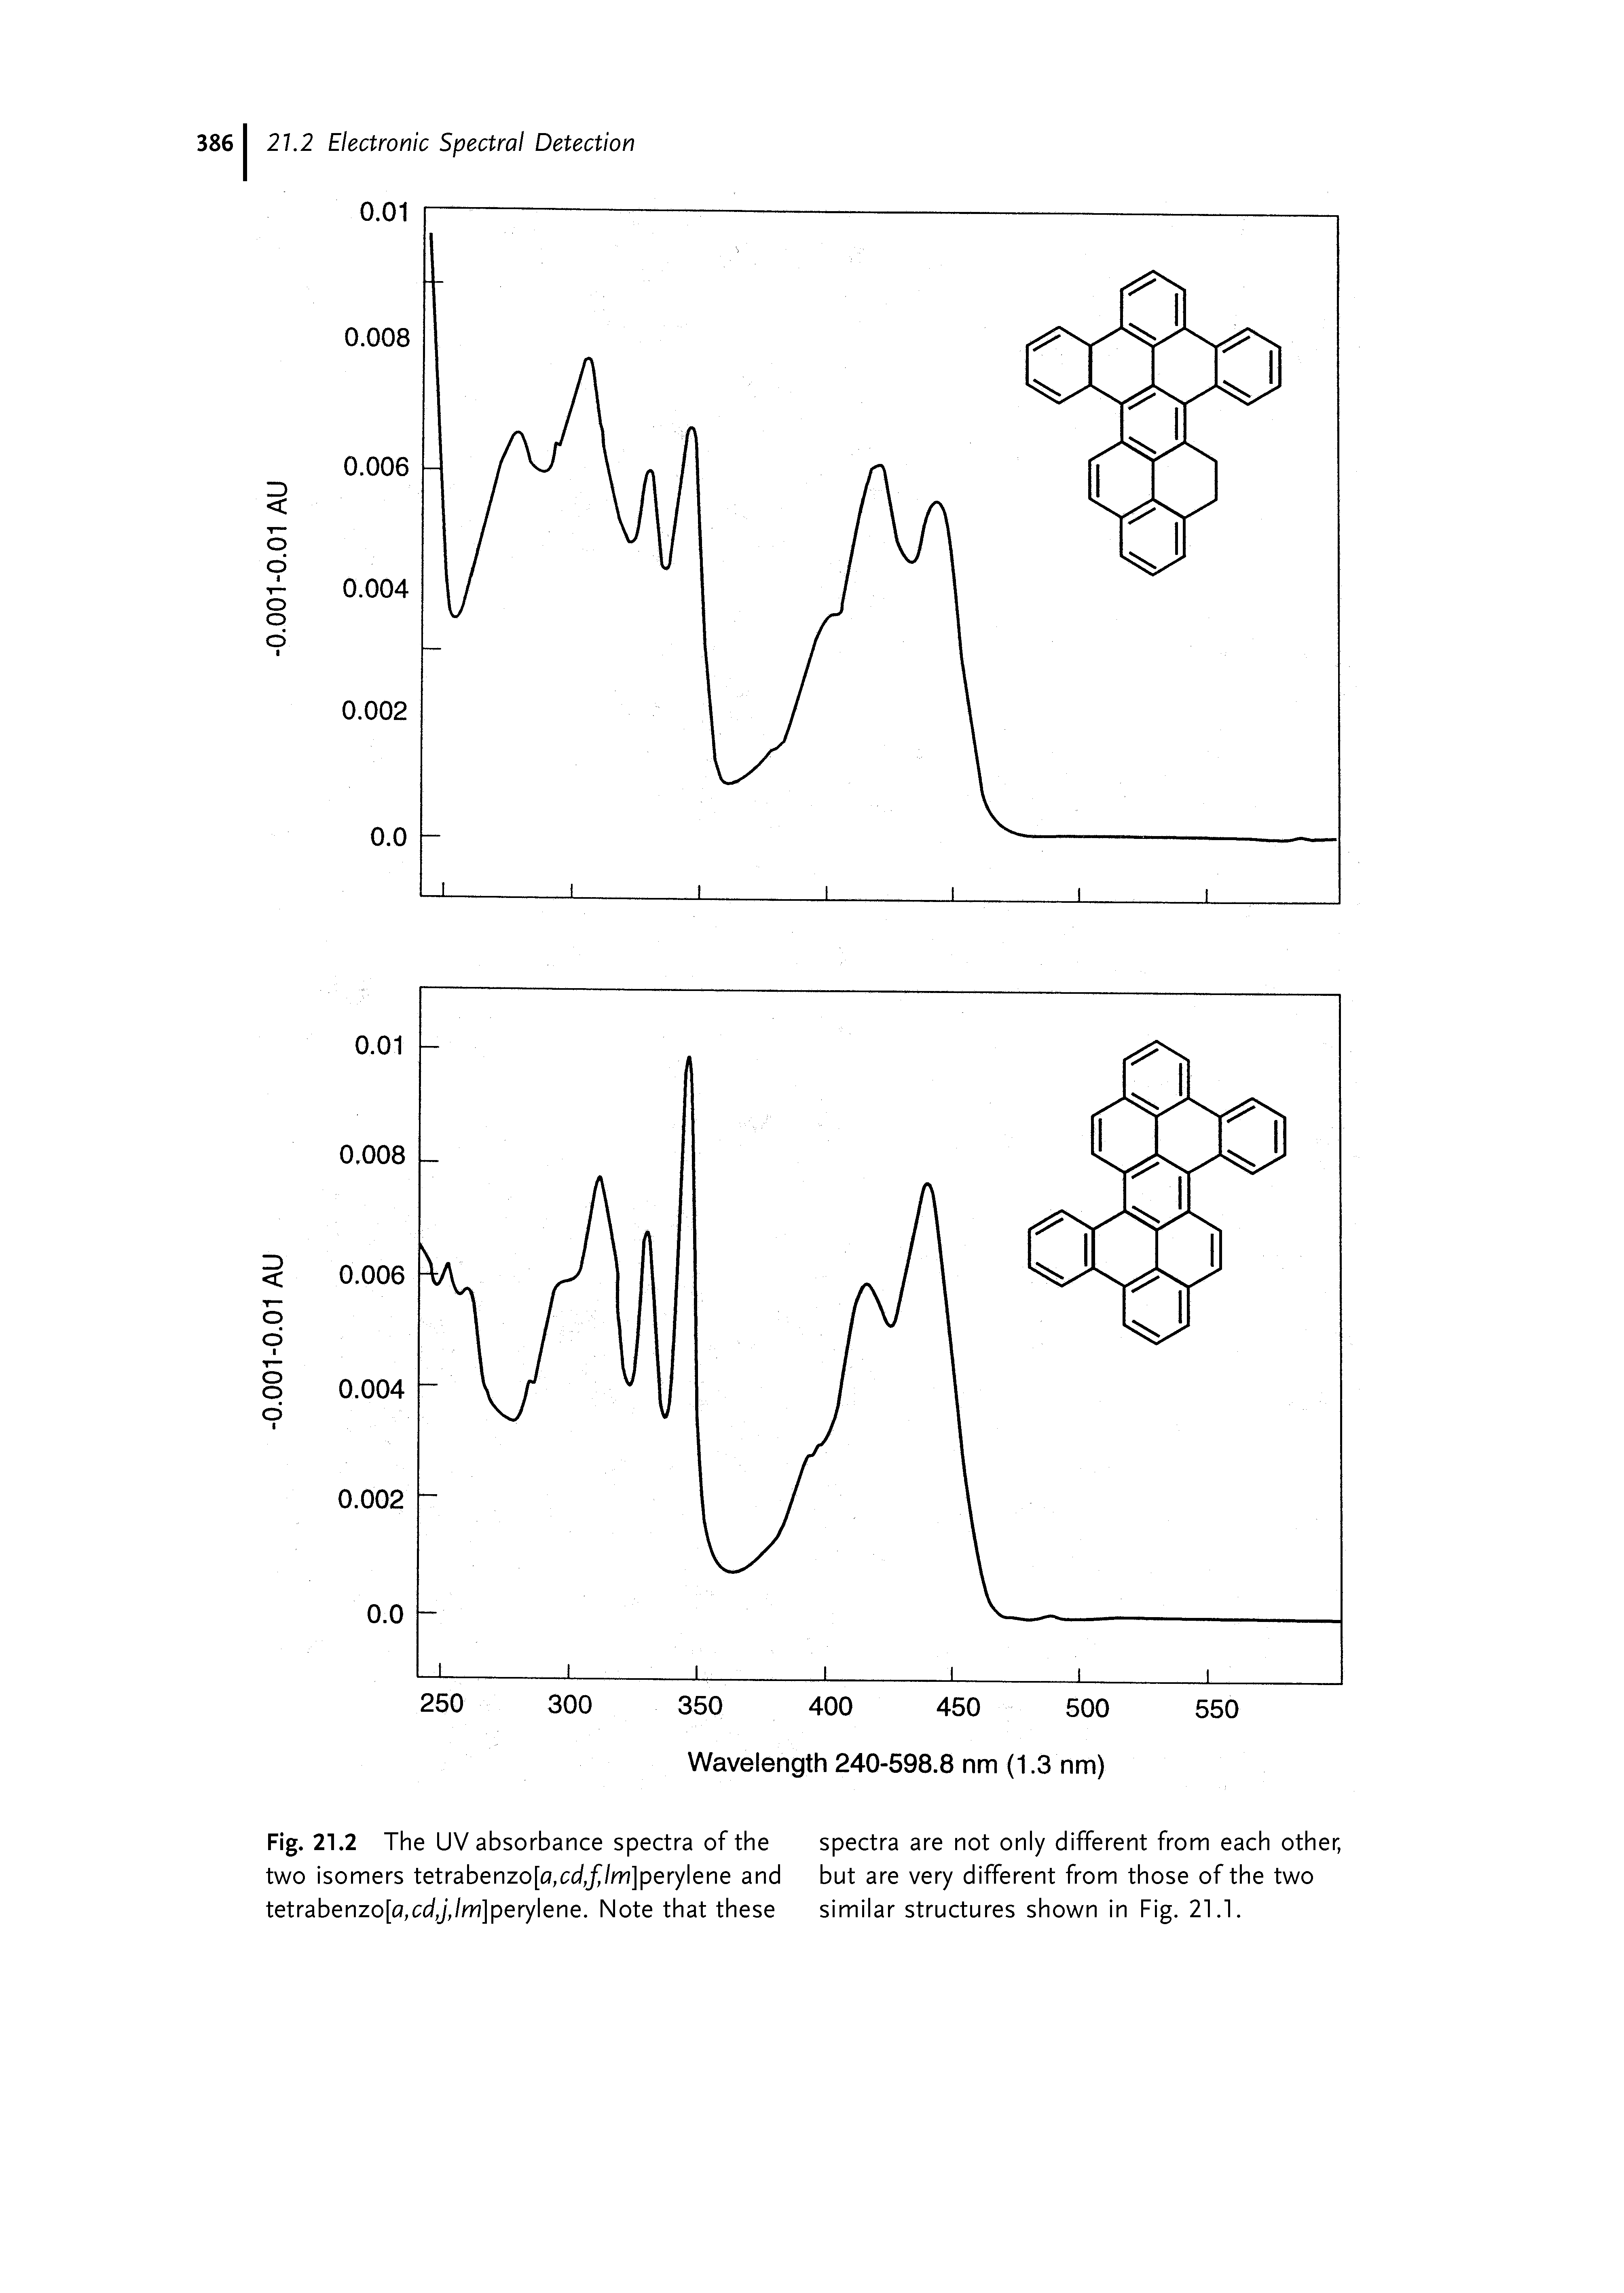 Fig. 21.2 The UV absorbance spectra of the spectra are not only different from each other, two isomers tetrabenzo[a,cd,//m]perylene and but are very different from those of the two tetrabenzo[fl,cd,j,/m]perylene. Note that these similar structures shown in Fig. 21.1.